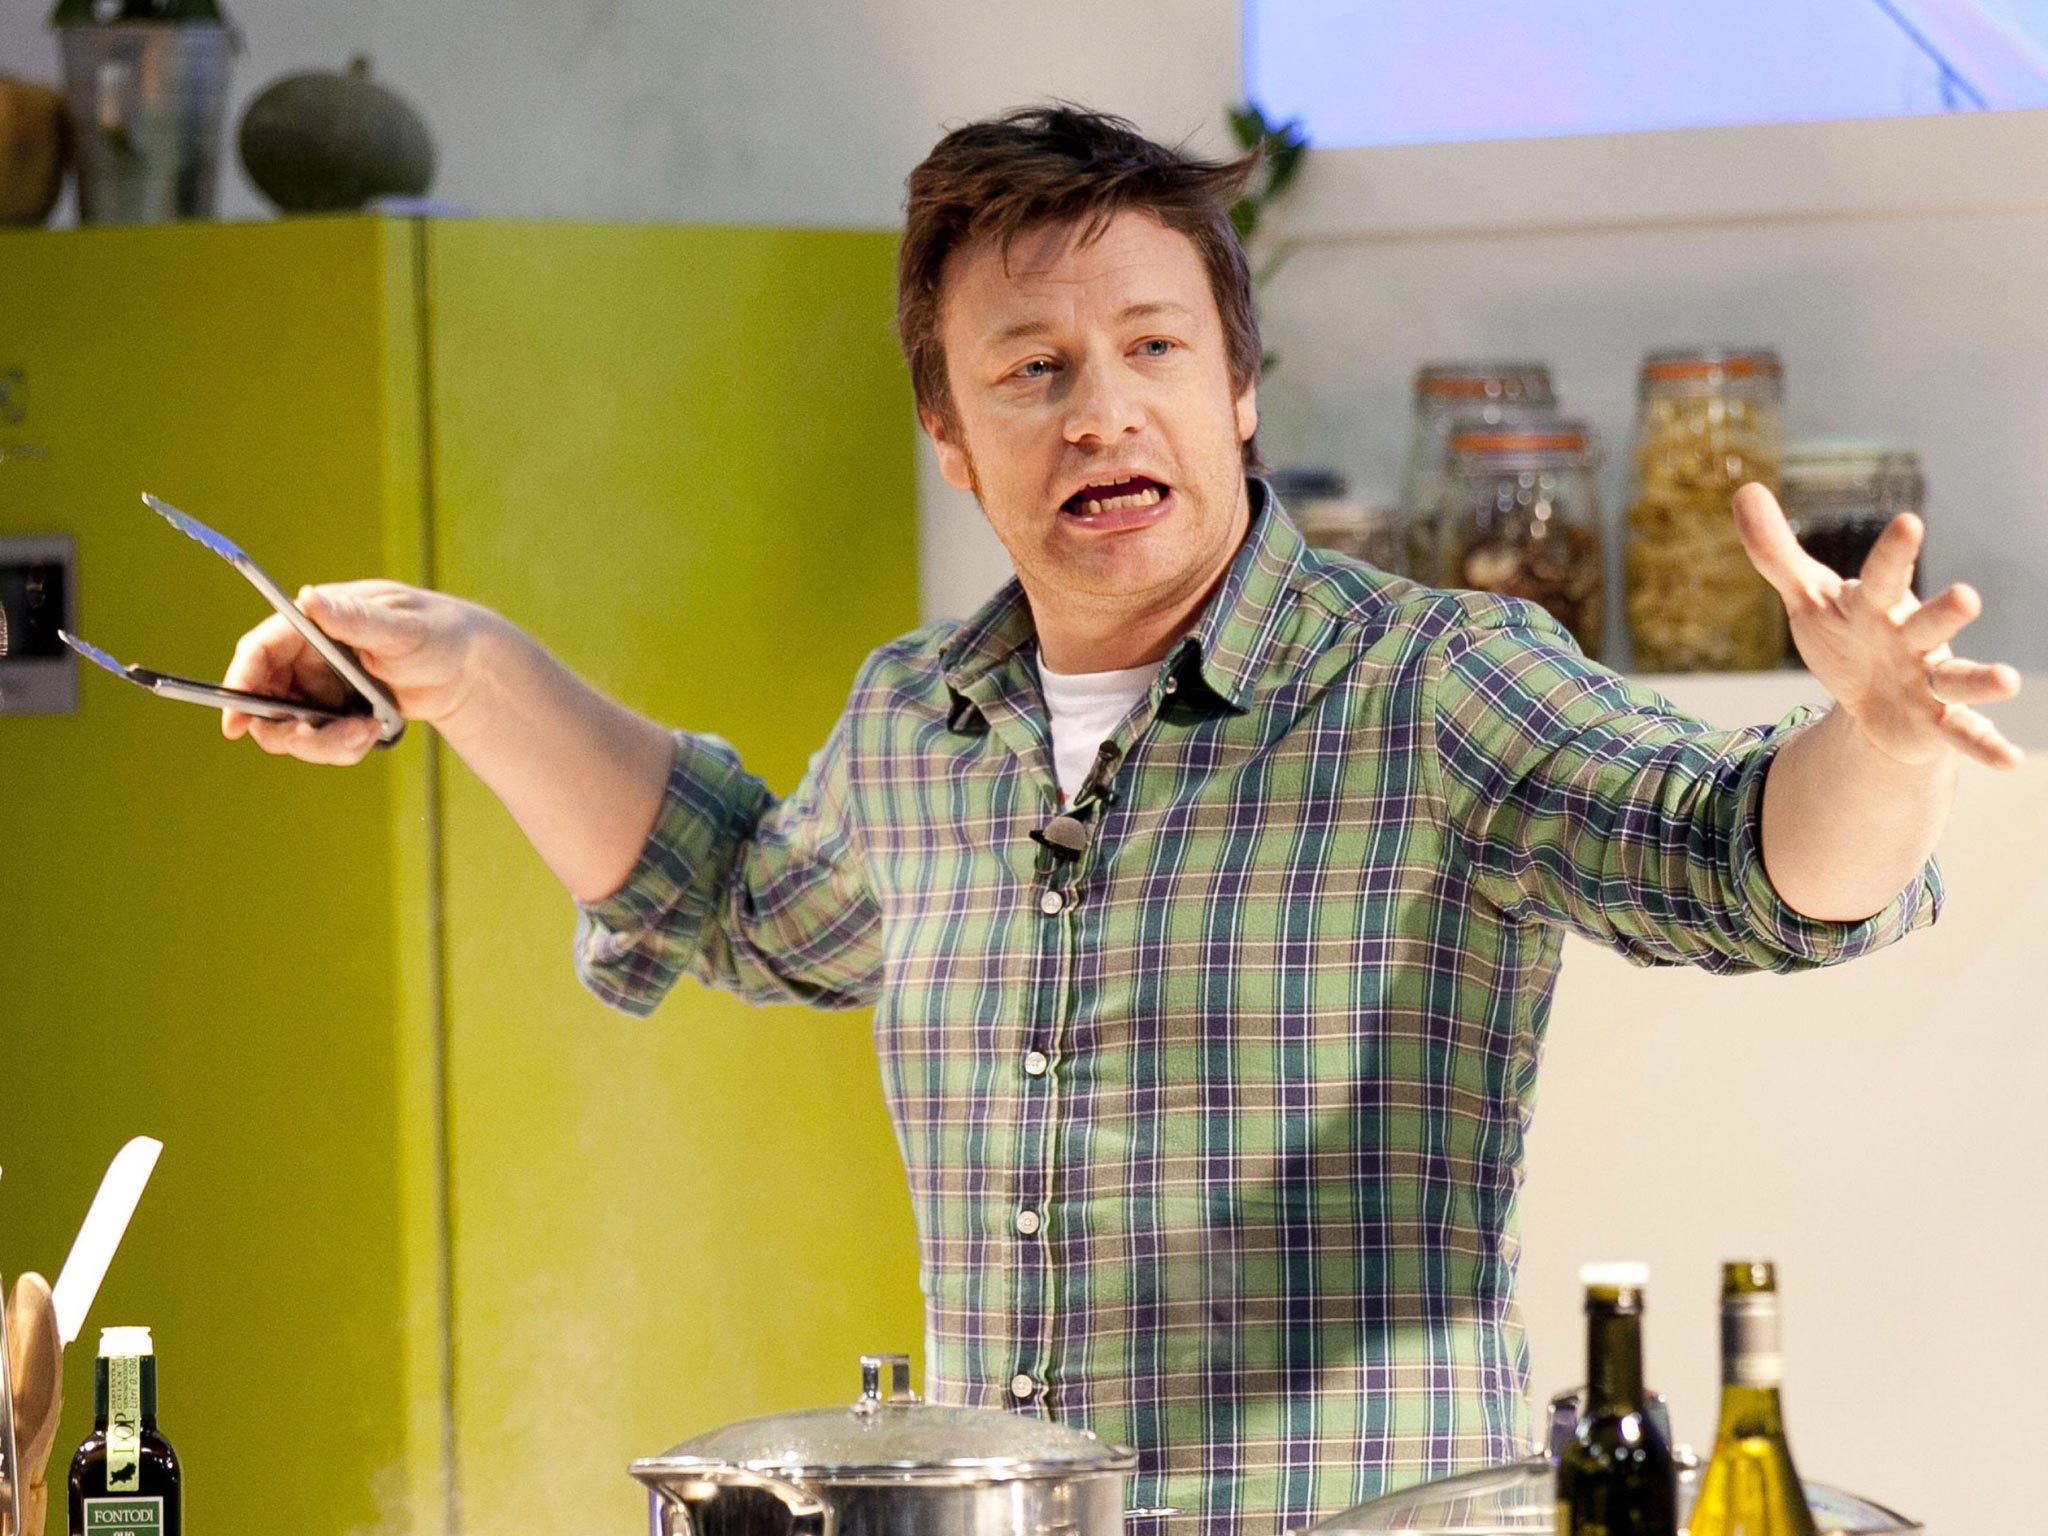 Jamie Oliver has written a new book called ‘Comfort Food’ and has a TV series planned